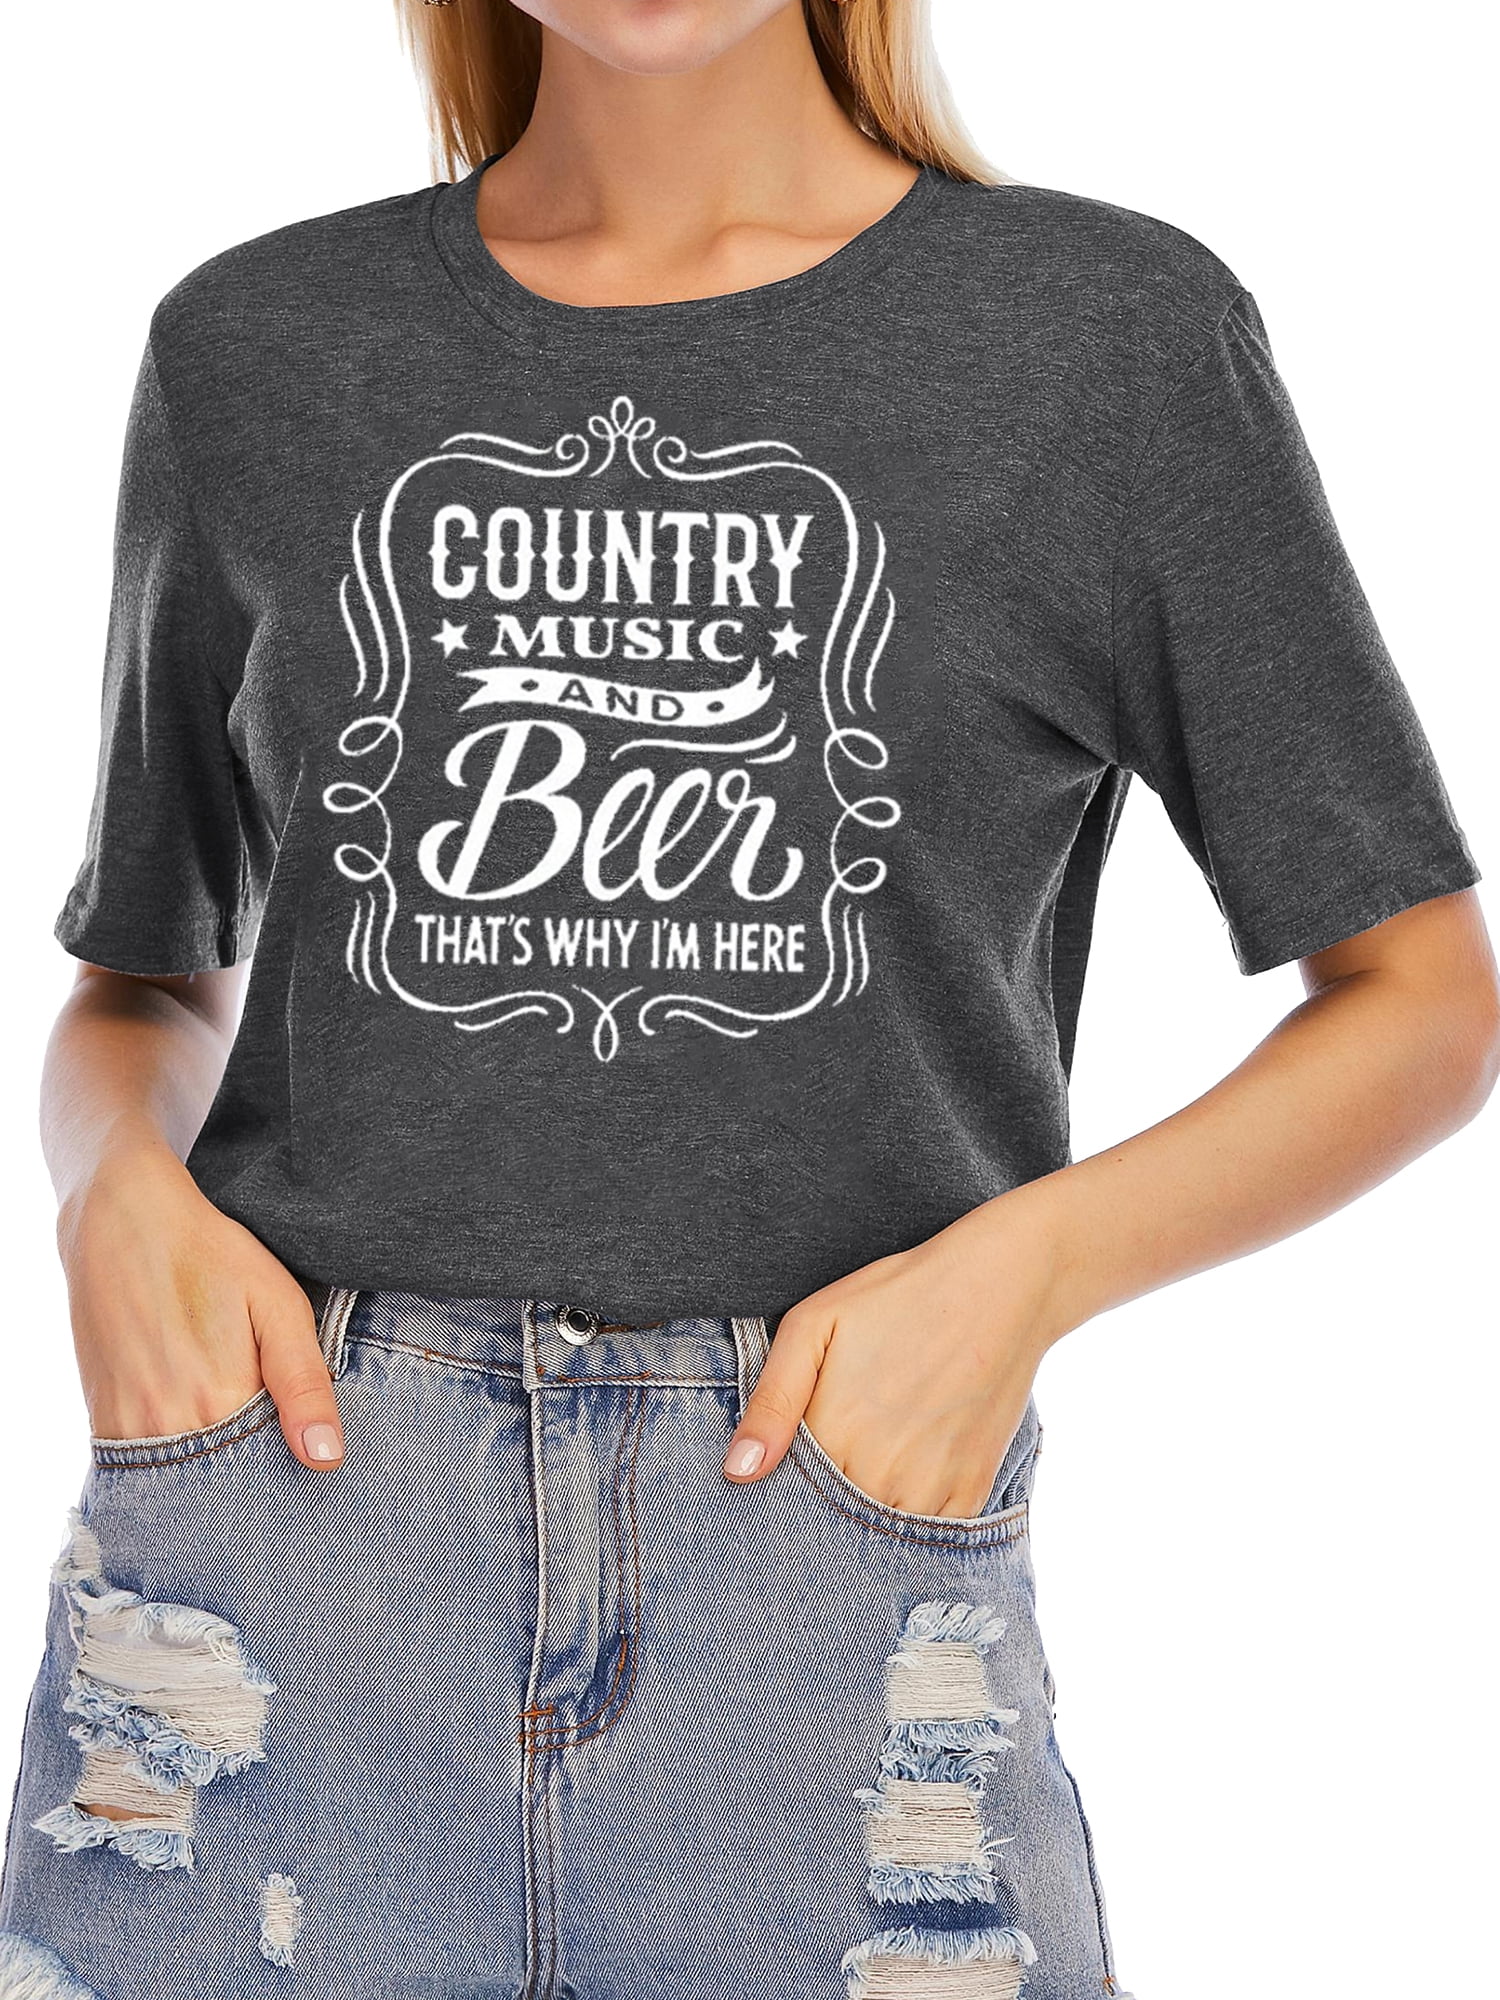 Women's Country Music Singer Hipster Tee Short Sleeve Blouse Top Casual T-Shirt 